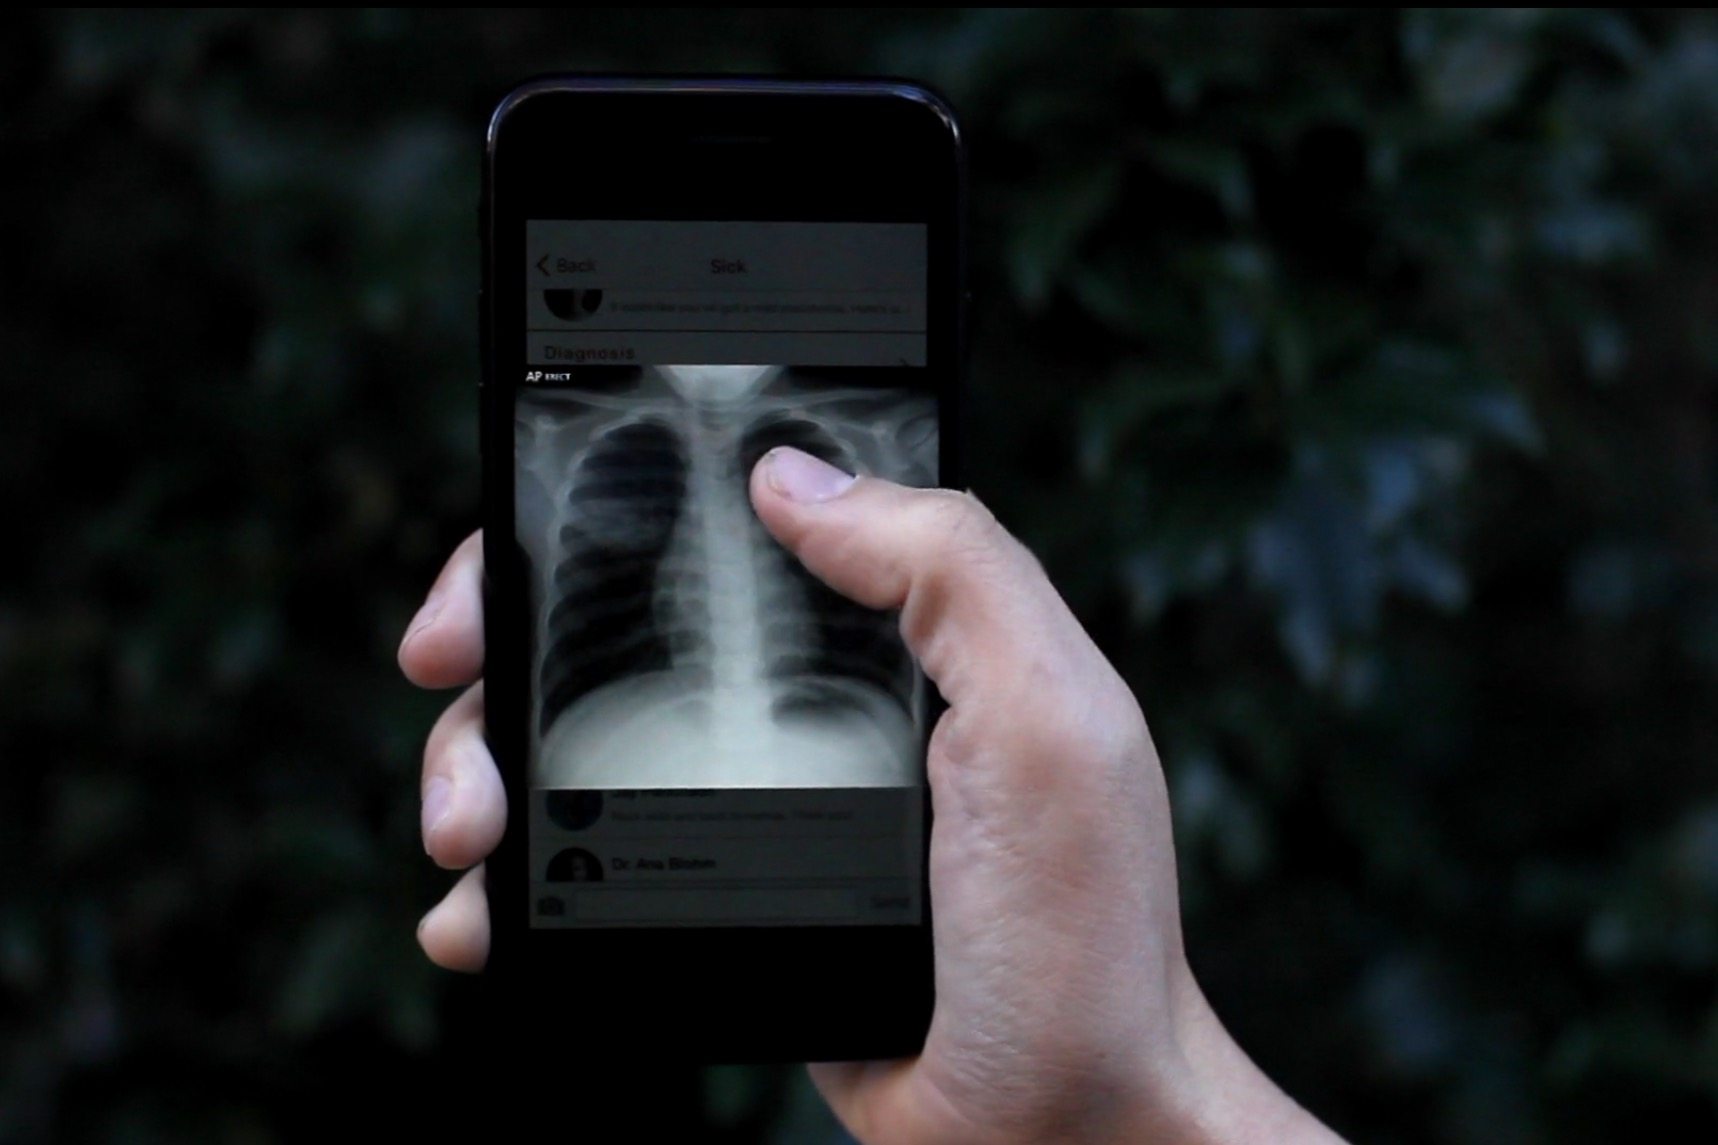 The Sherpaa app allows users to get medical advice while traveling. 